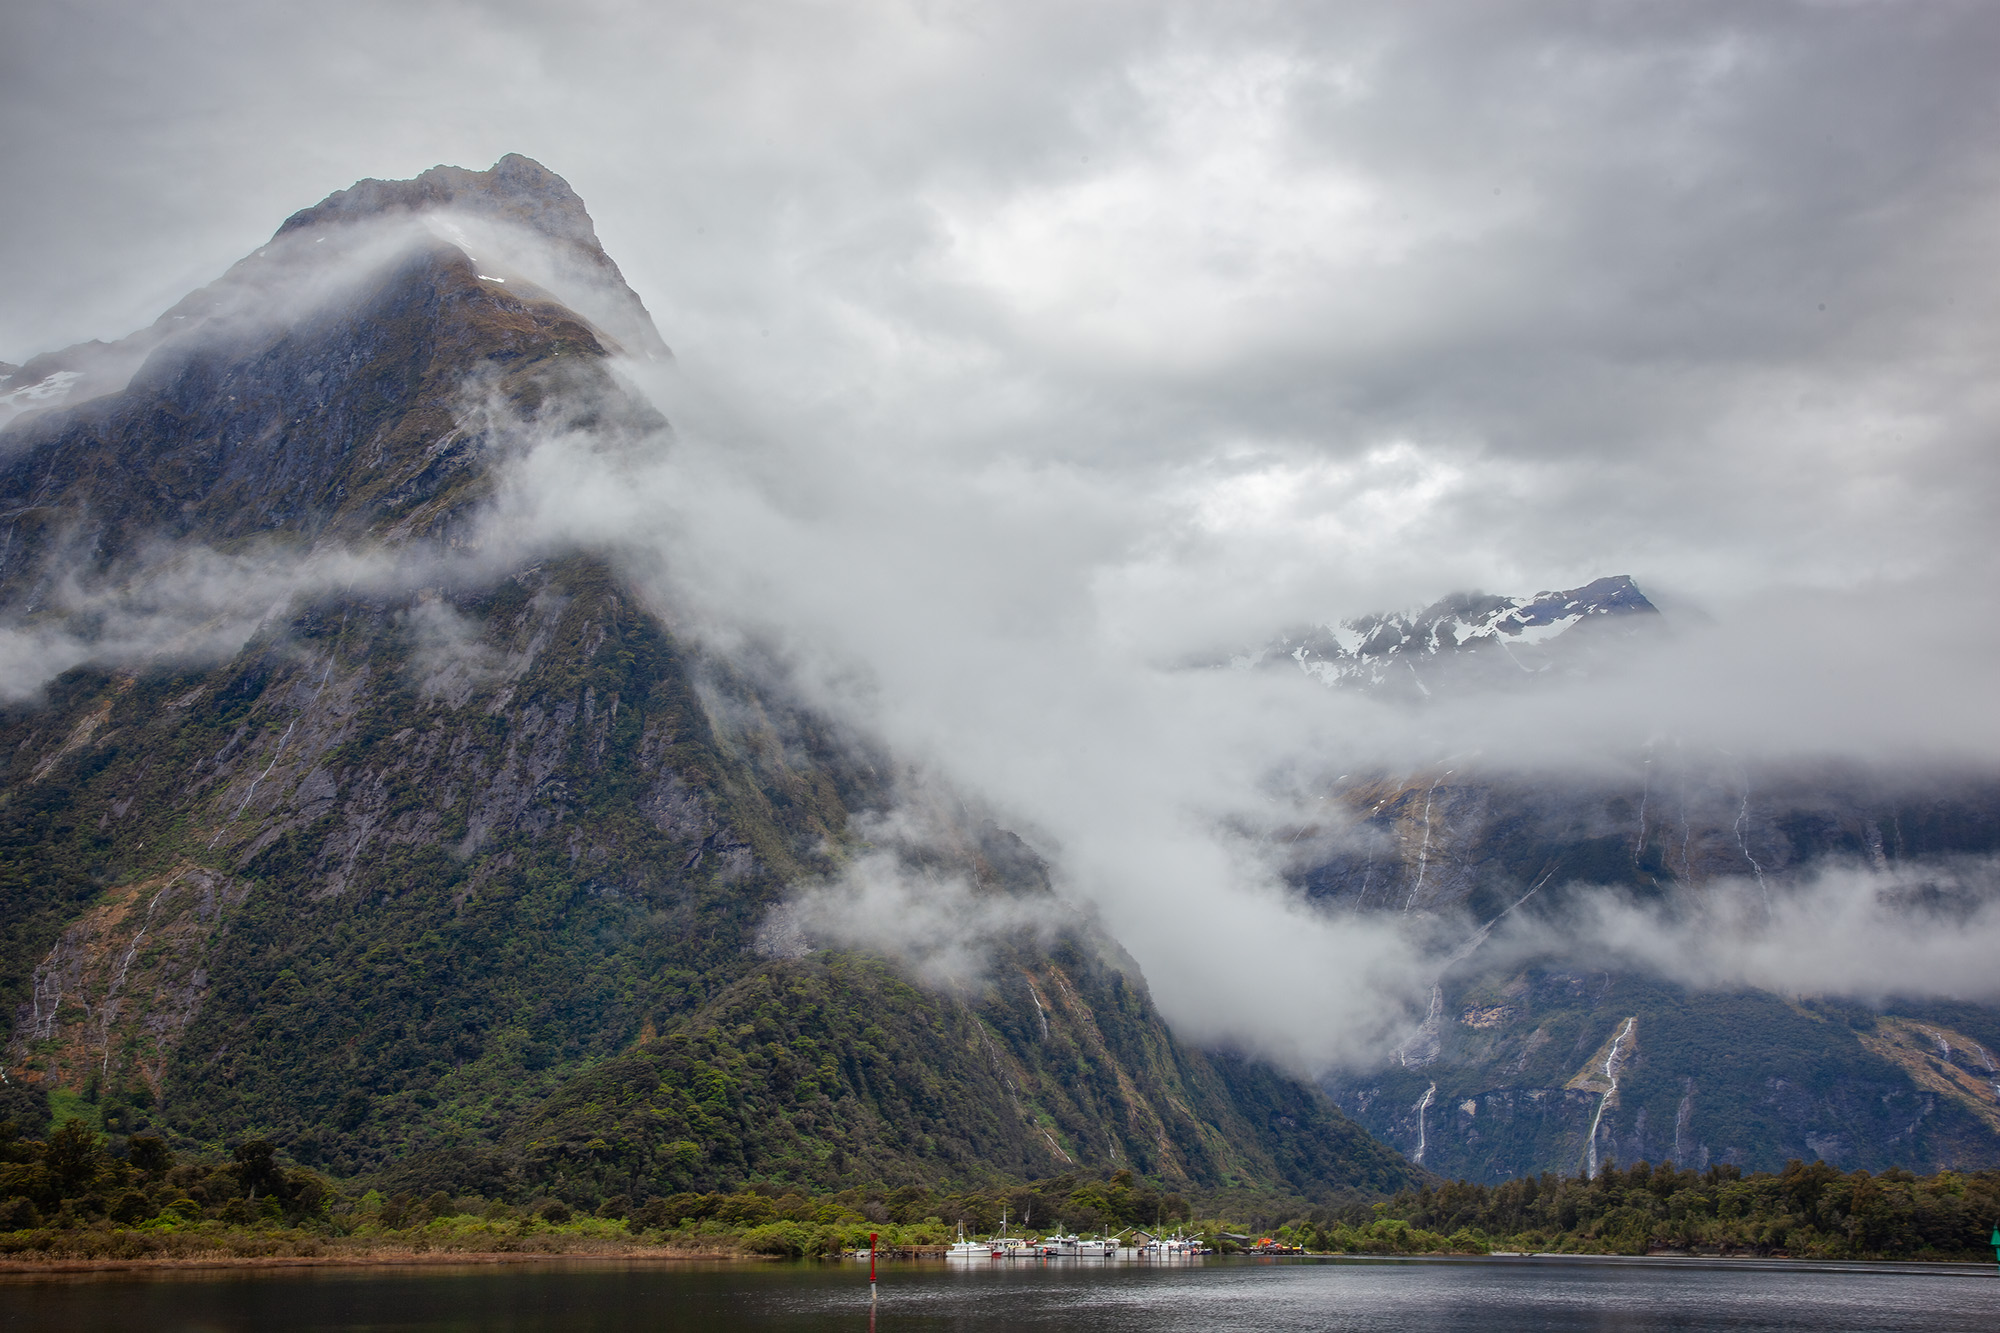 On a gray and overcast day in Milford Sound, New Zealand, this image unveils the grandeur of nature. Towering mountains shrouded...